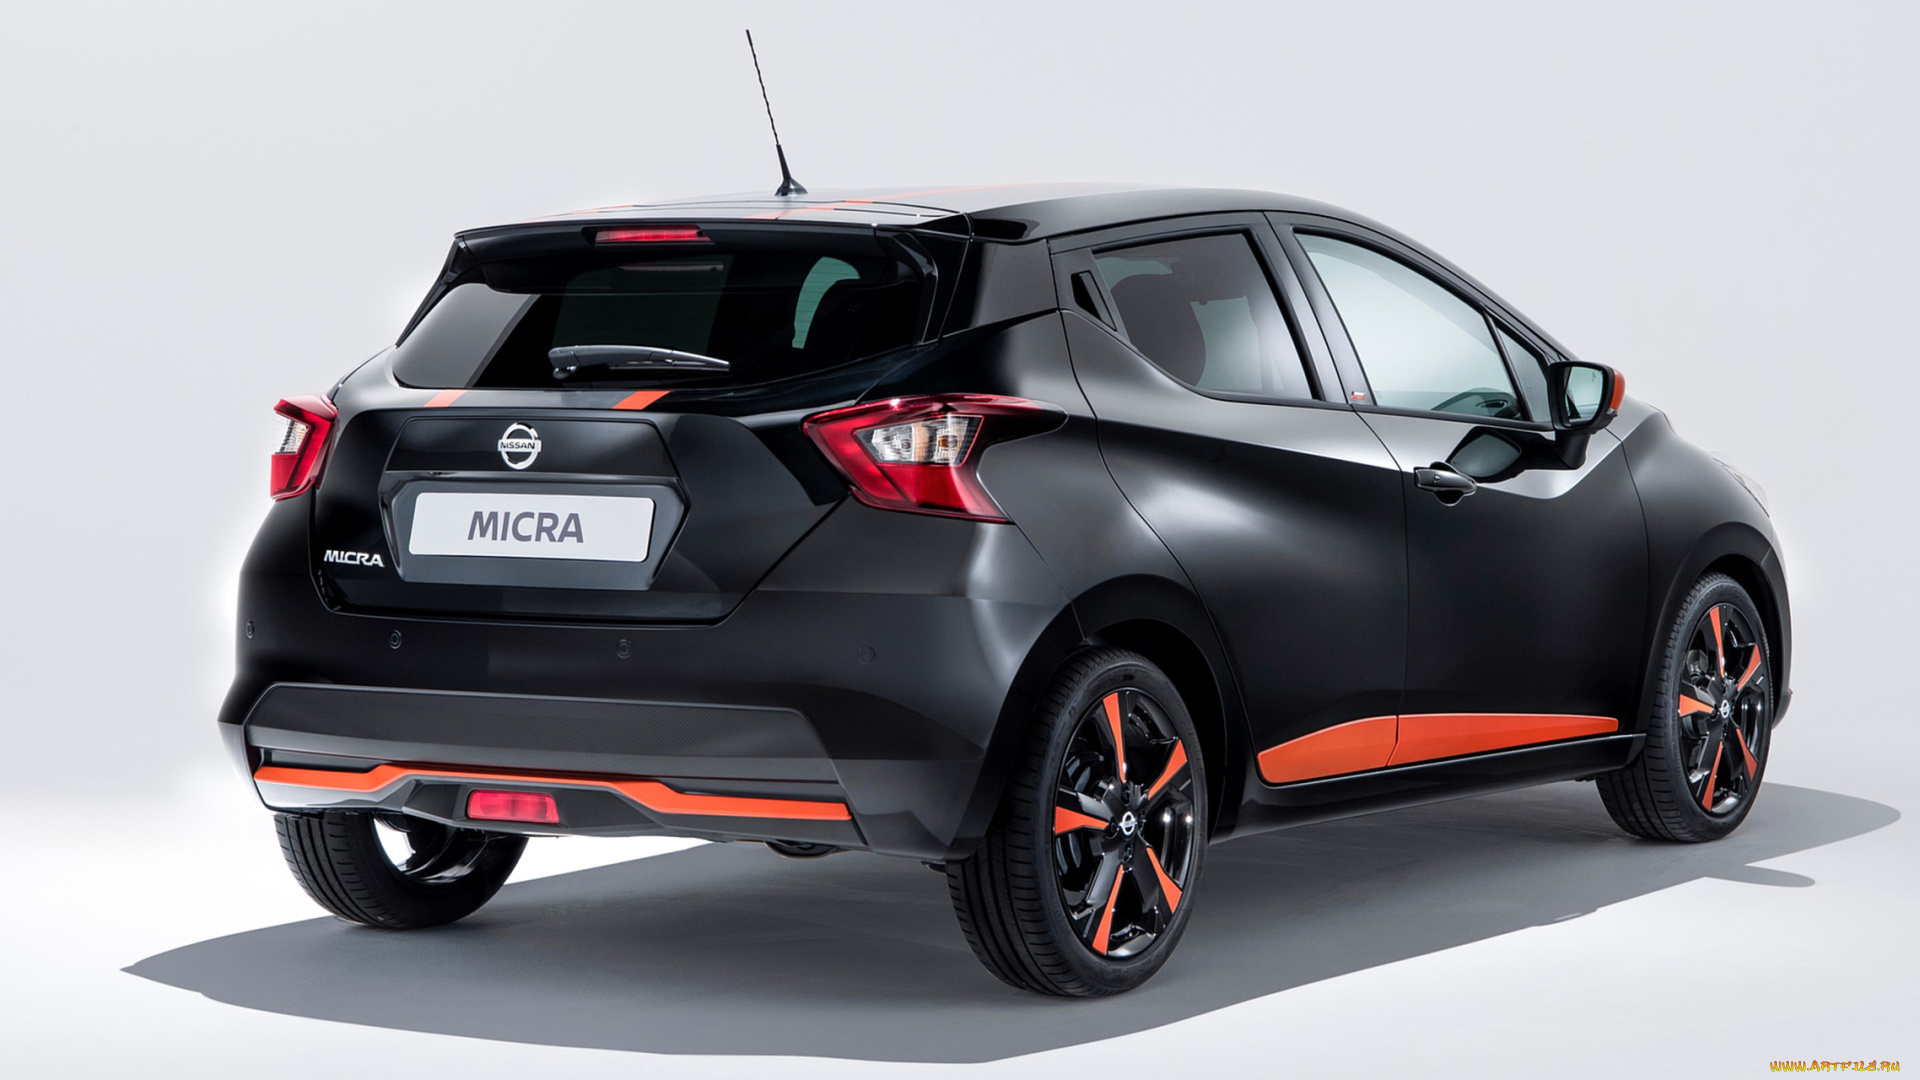 nissan, micra, bose, personal, edition, 2017, автомобили, nissan, datsun, micra, 2017, edition, bose, personal